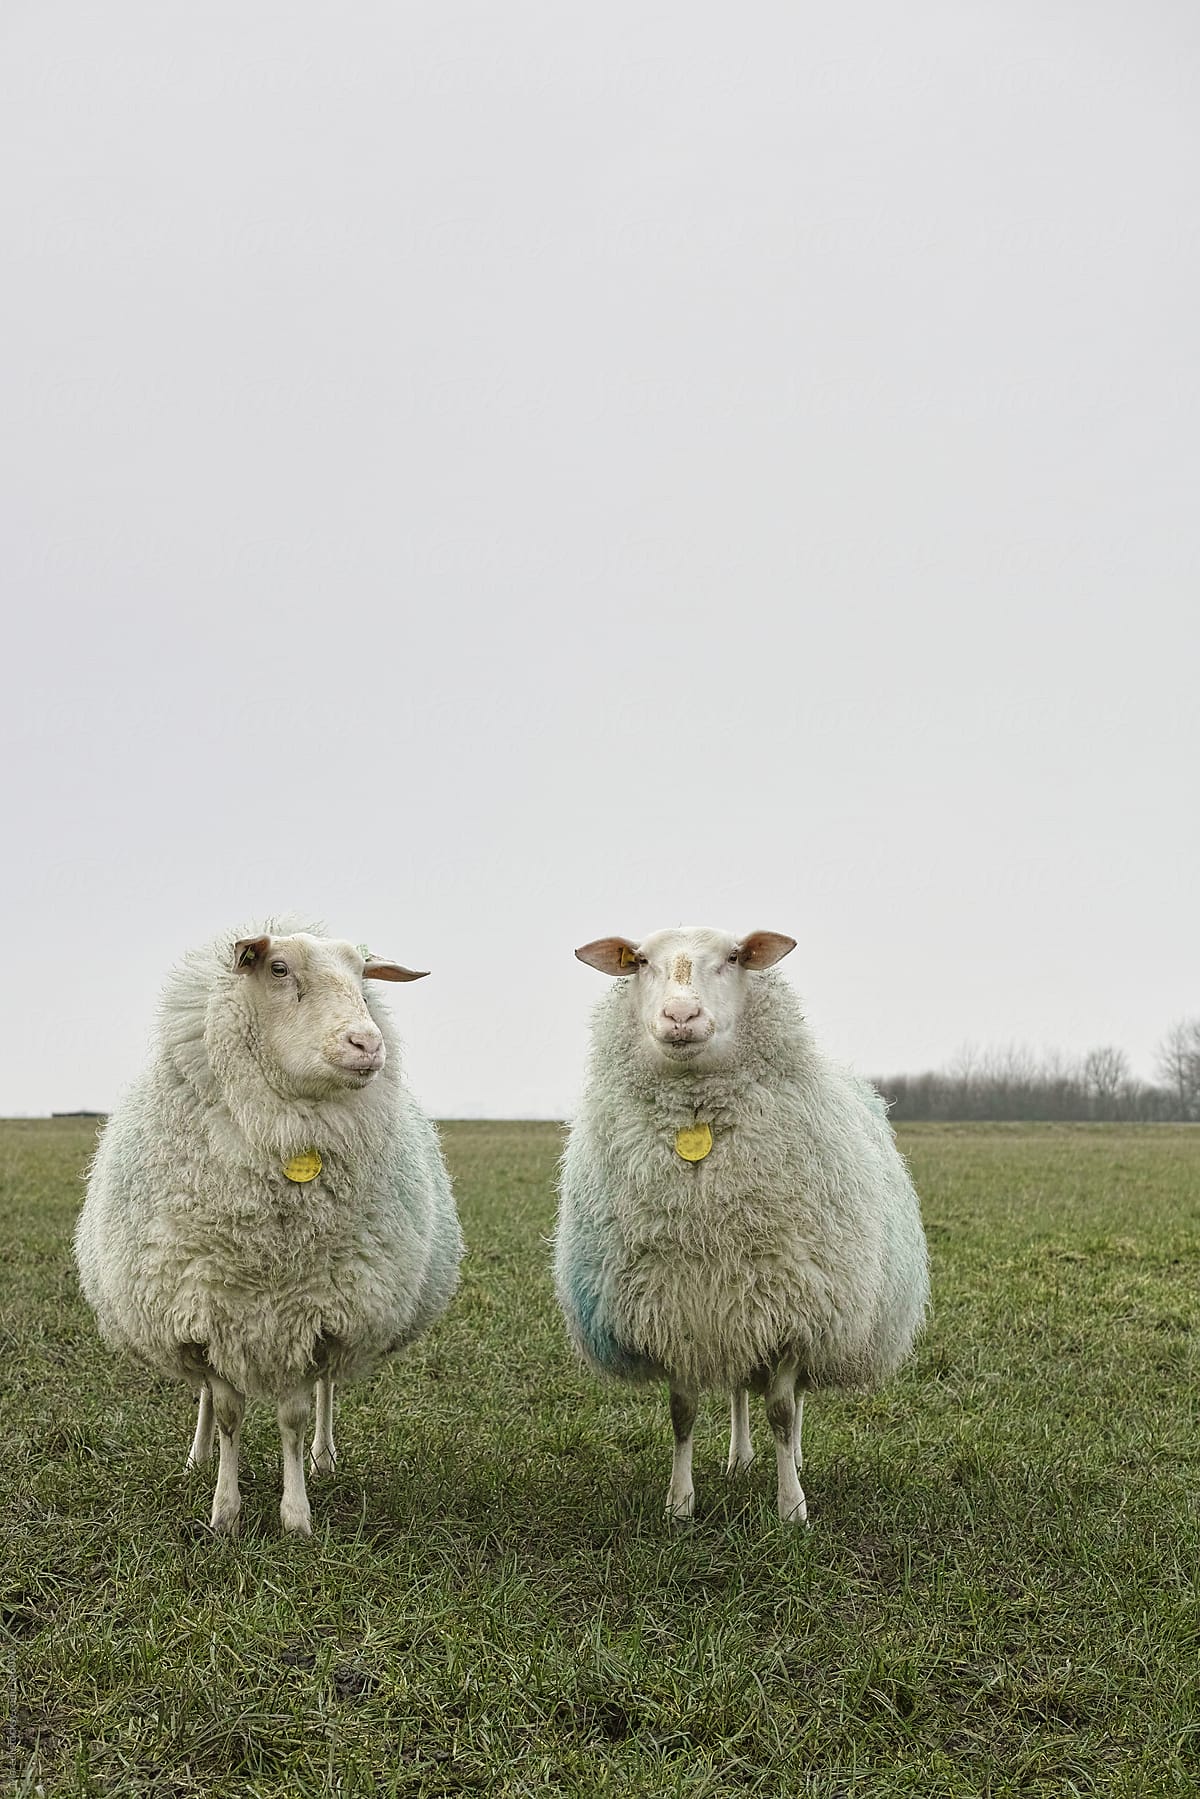 Two sheep in a meadow